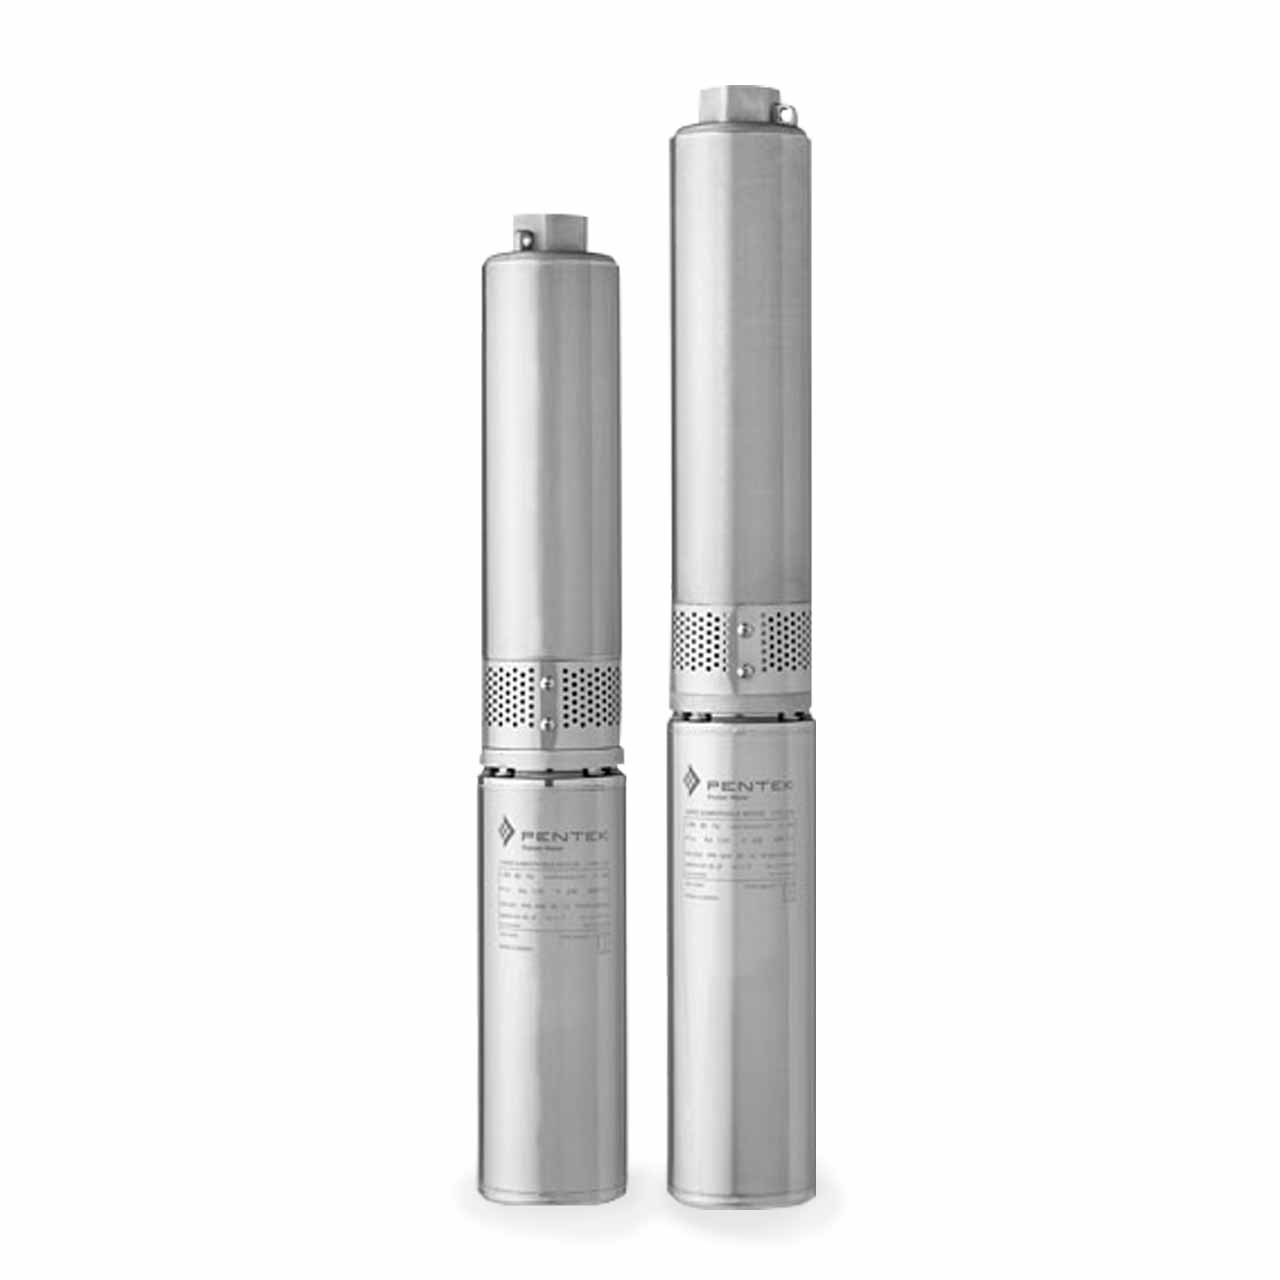 Privilegium gå i stå Shining Myers - Myers 2ST152-8PLUS-P4 Submersible Stainless Steel Pump 8 GPM 1.5 HP  230V 2-Wire 1PH #MYR2ST1528PLUSP4